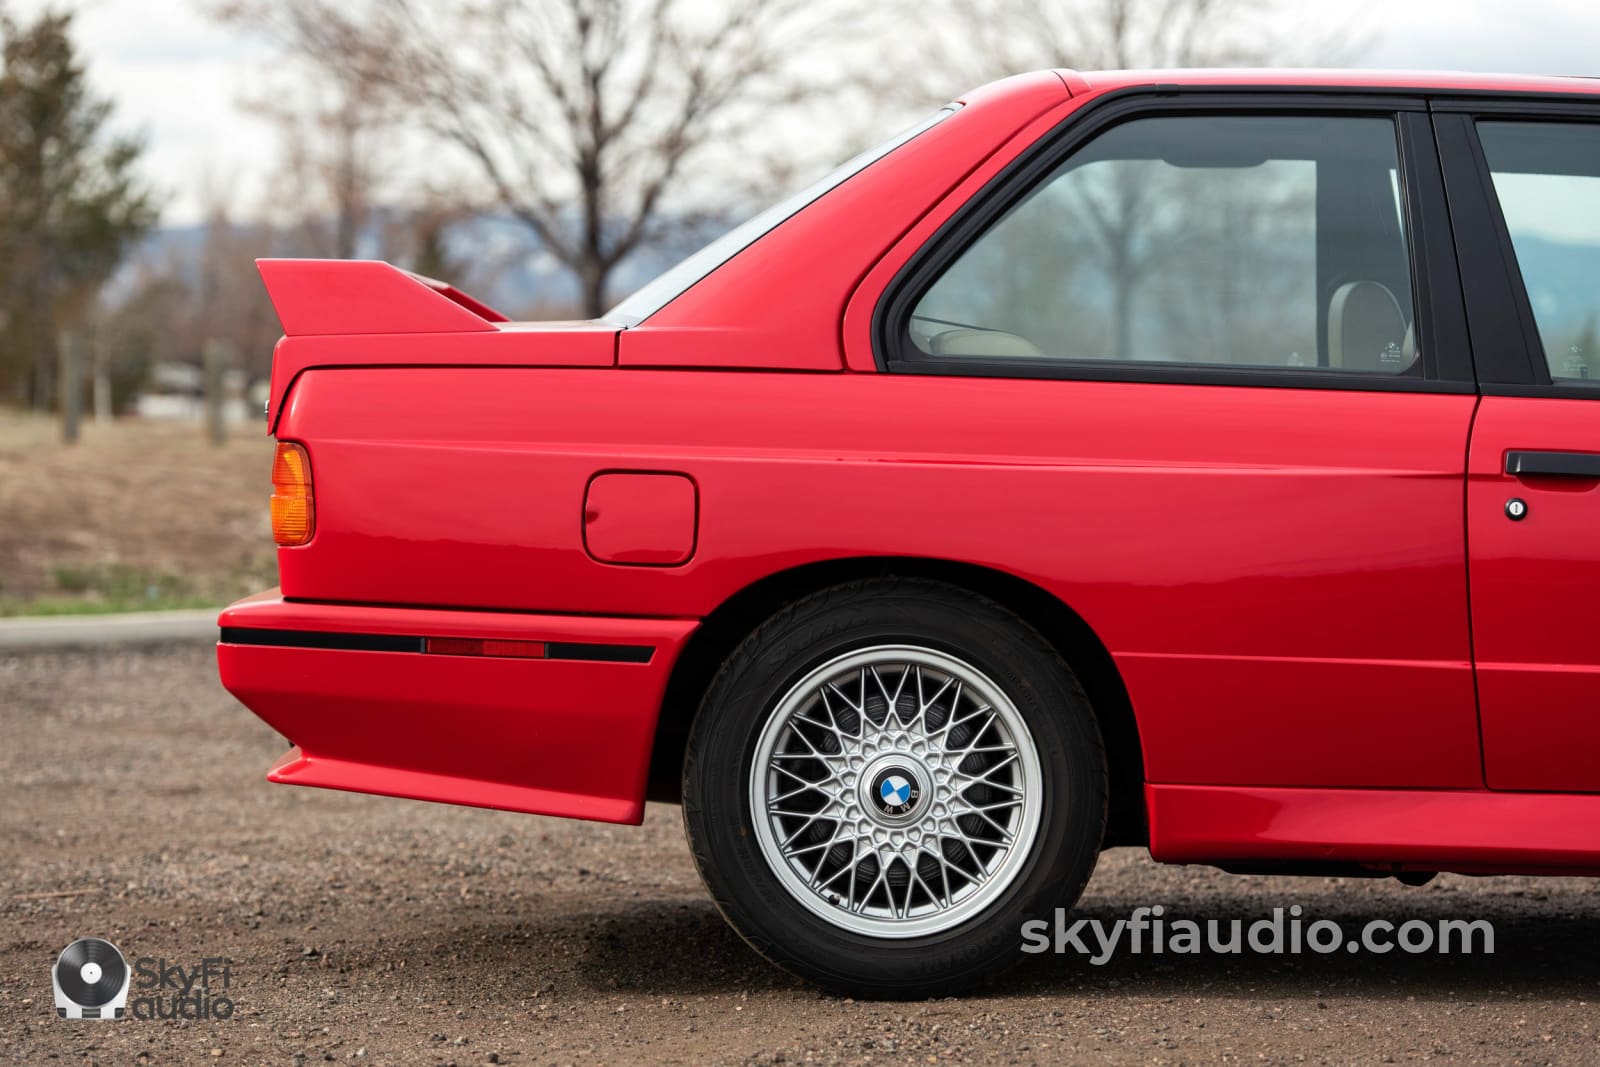 1991 Bmw E30 M3 Coupe - Brilliantrot Red Low Miles Vehicle